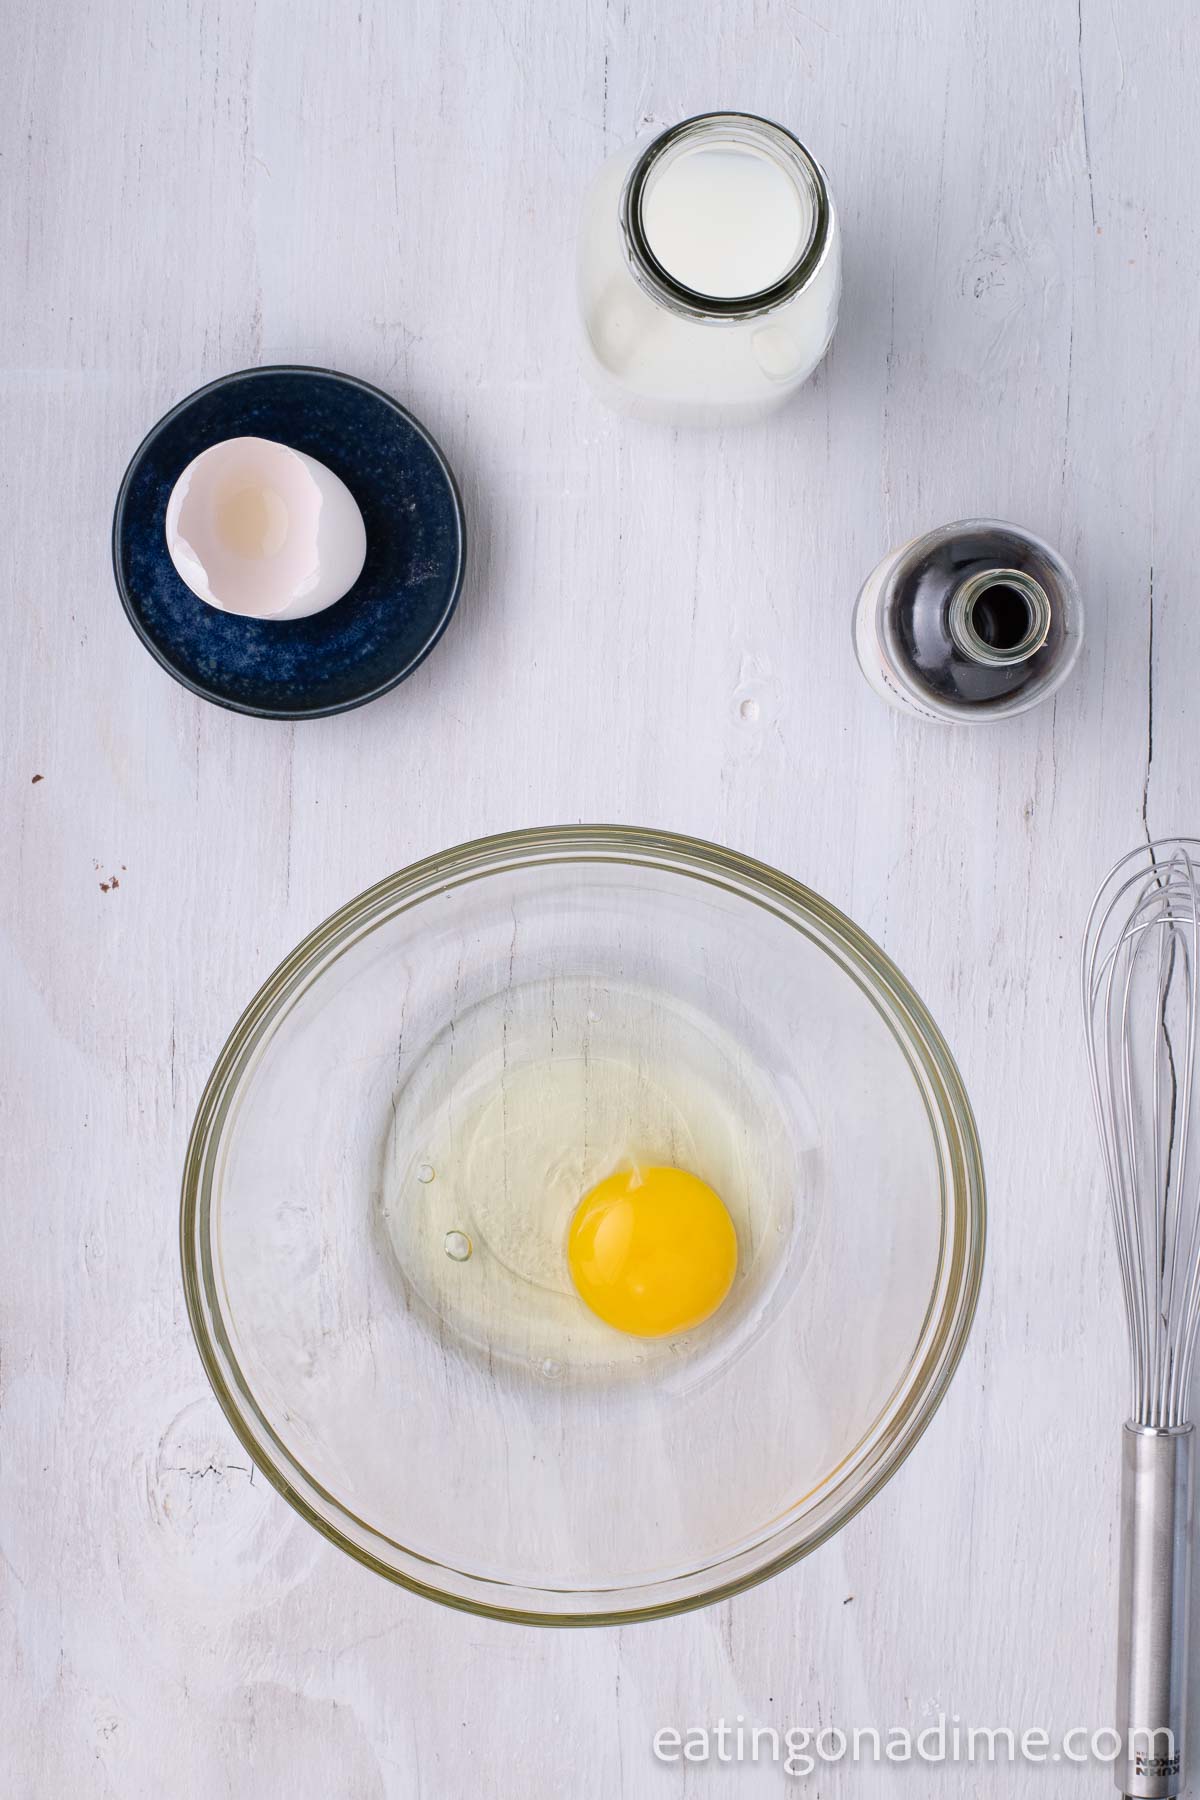 Separate mixing bowl with egg. 